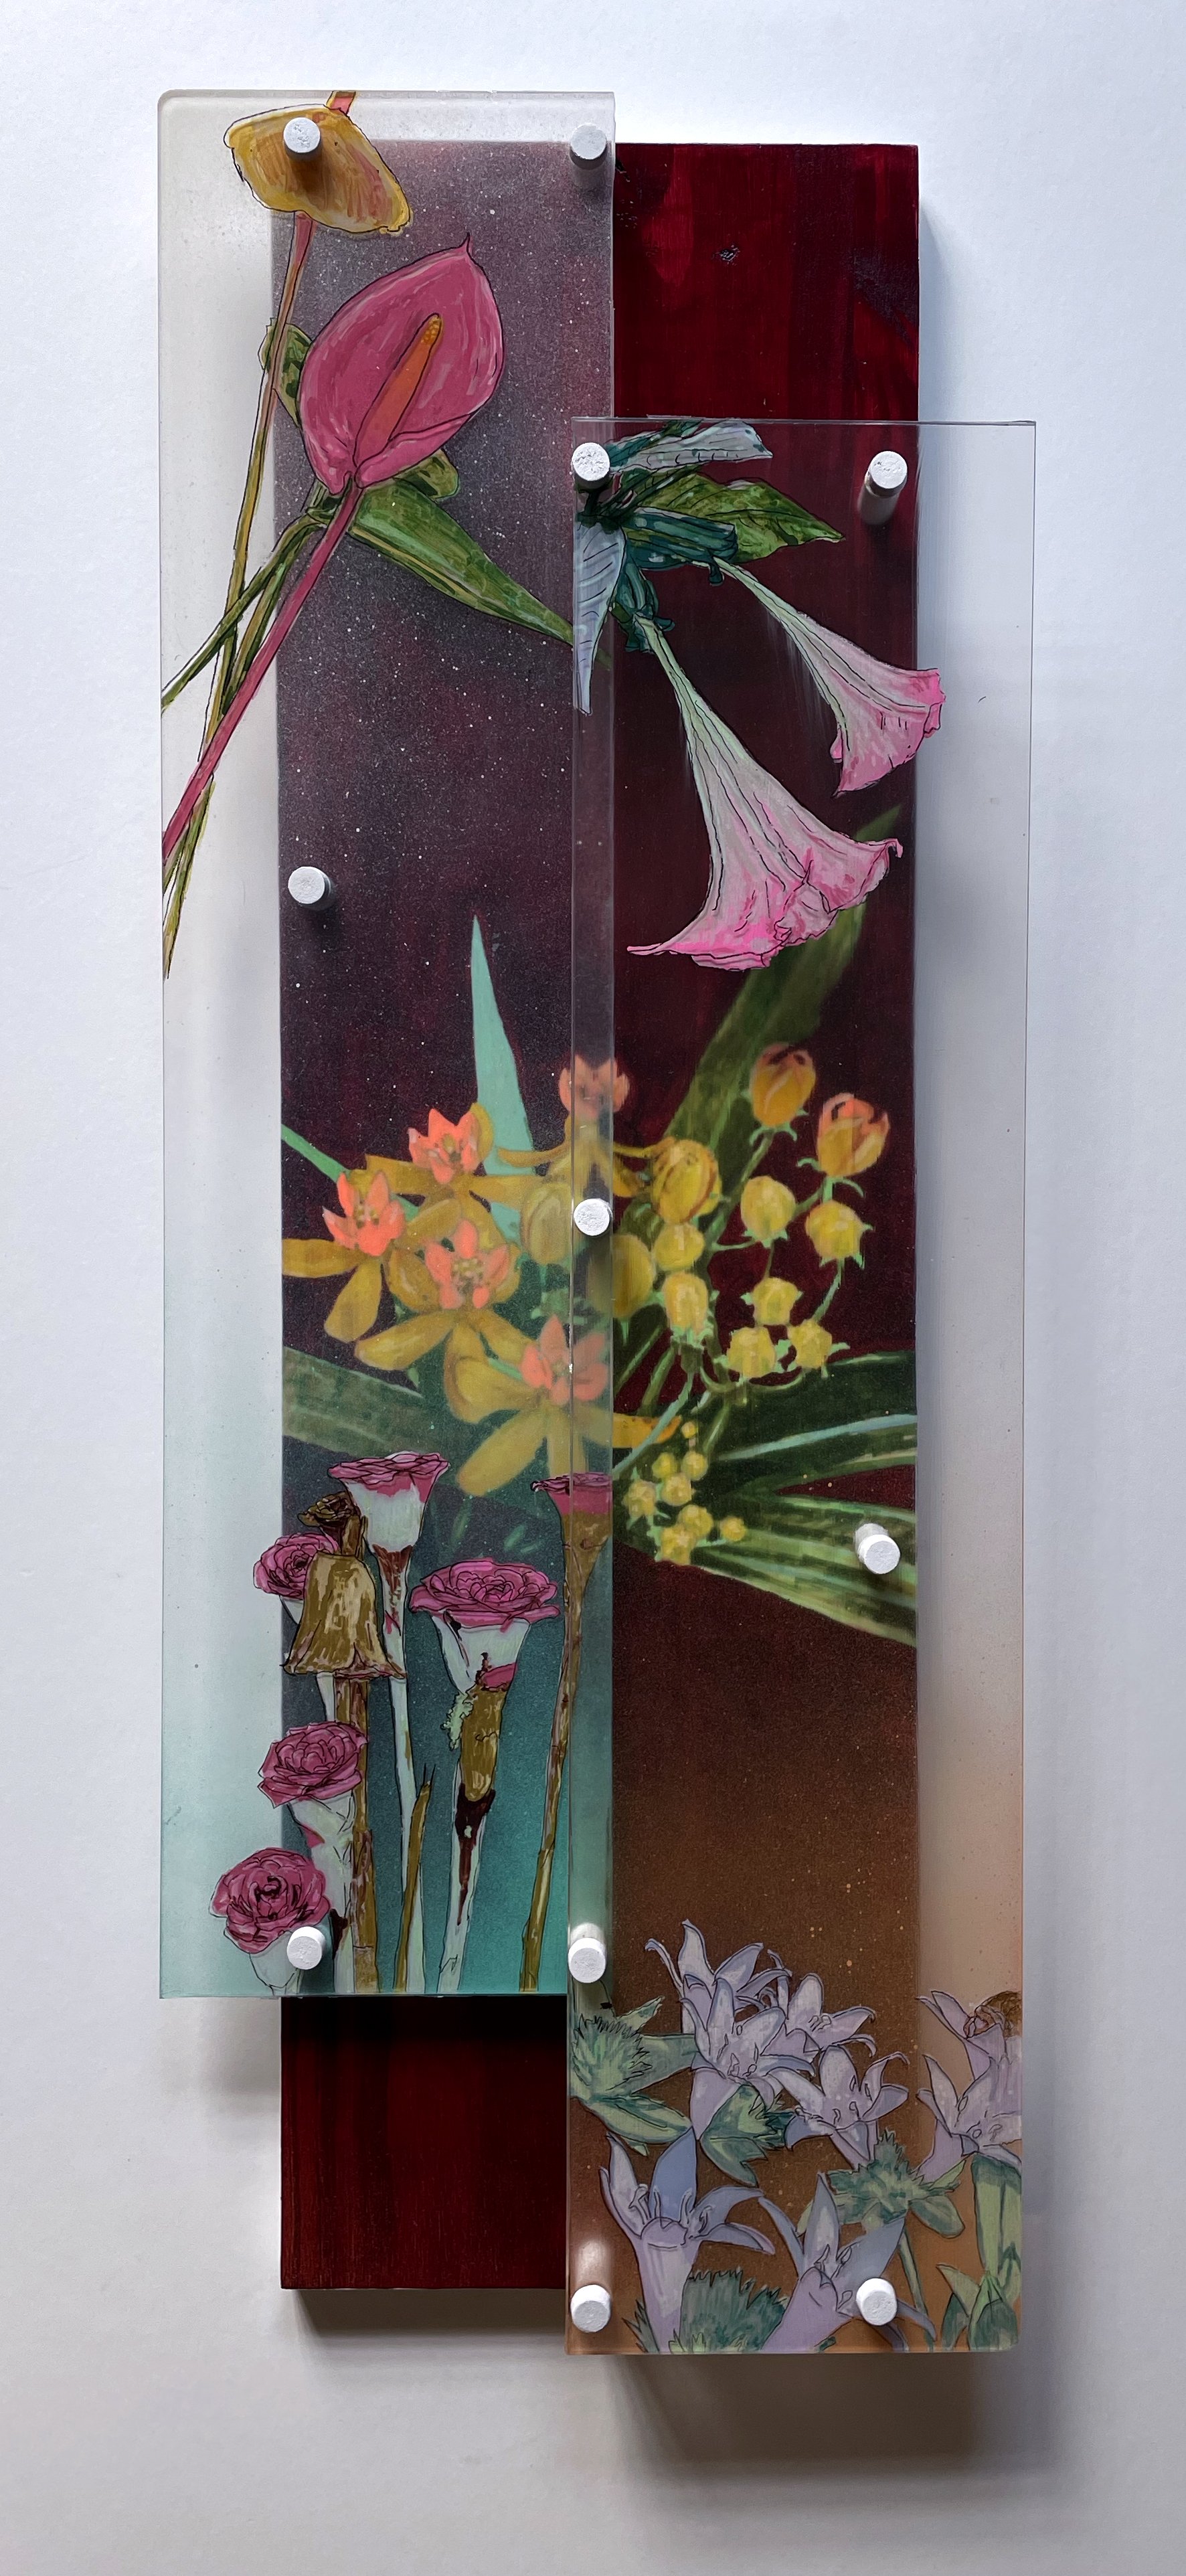   Flora South Florida  acrylic on plexiglass and wood. 2022  exhibited -  Tru by Hilton during Reflections Of The Big Book 2023;   Ali Cultural Arts during Esther’s Garden 2022;   Daggerwing Nature Center, Boca Raton, FL 2022;   GalleRE, Resource Dep